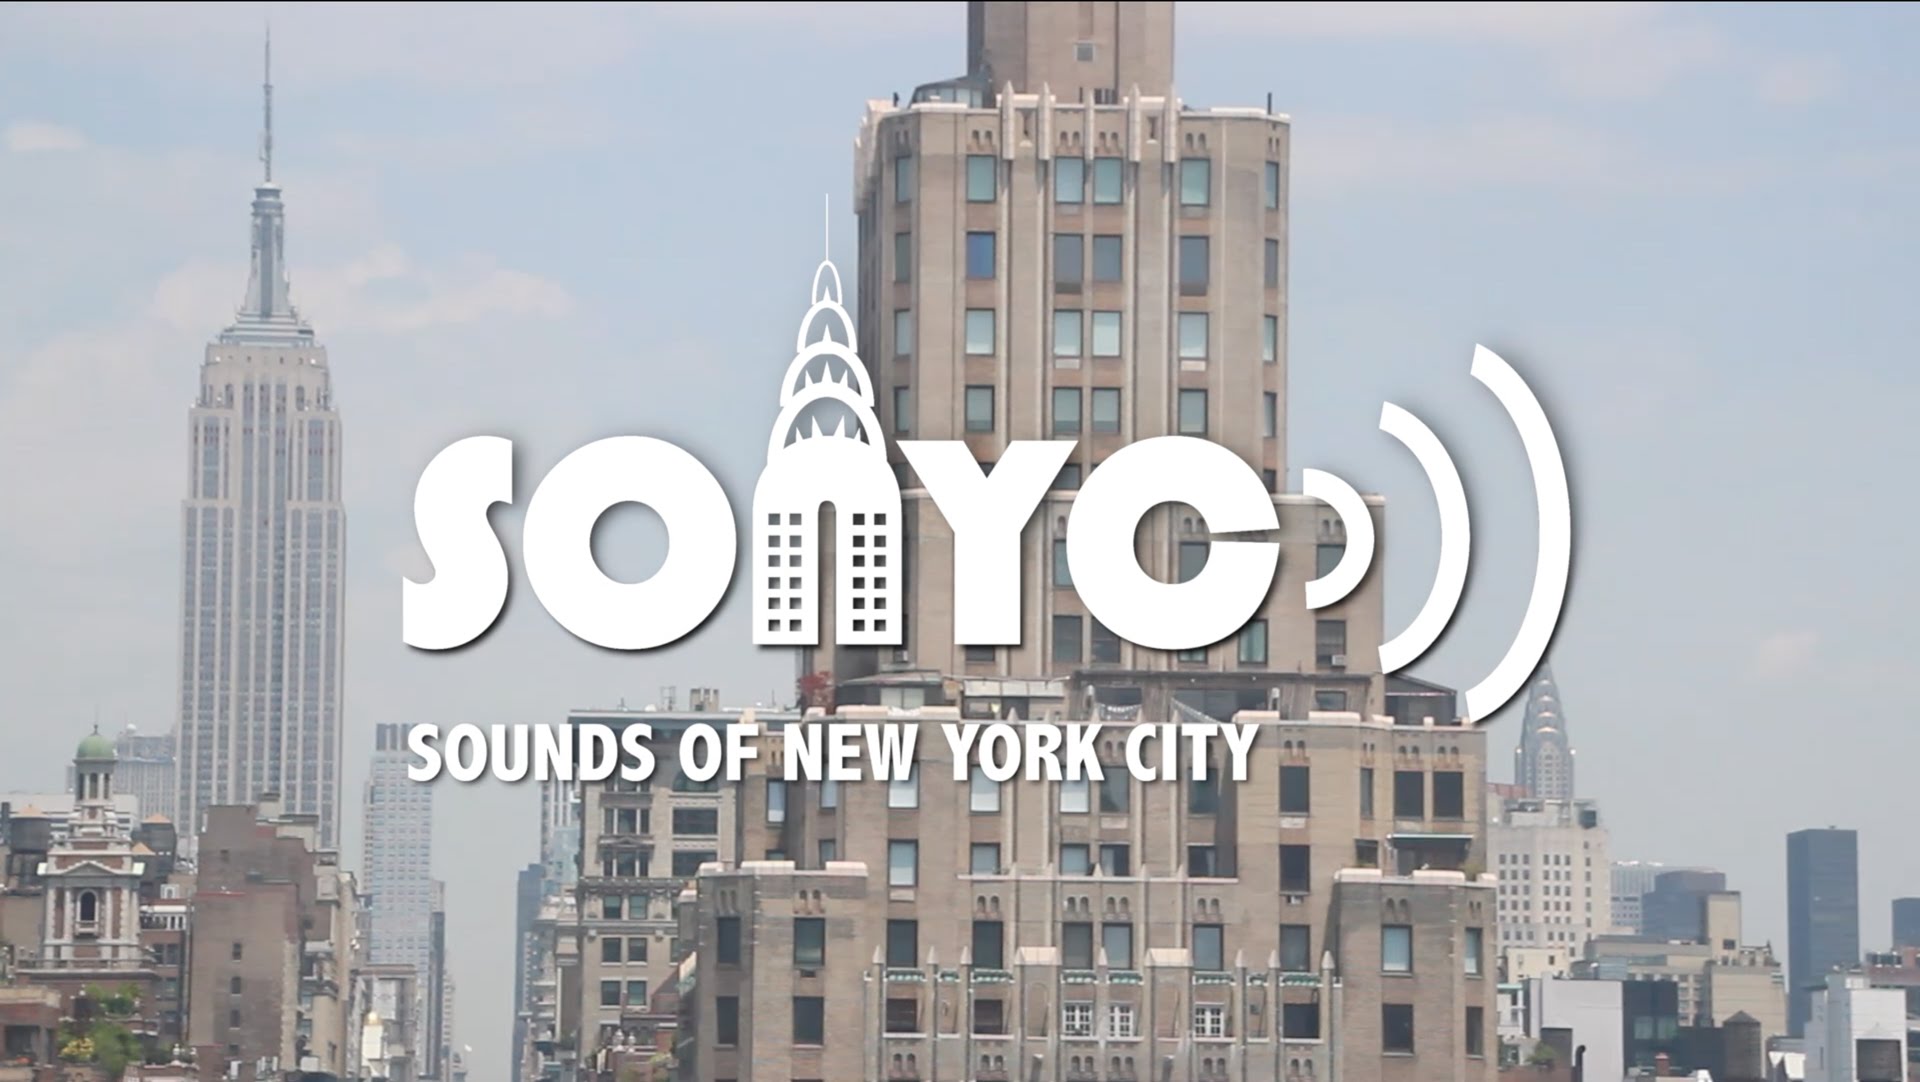 Sounds of New York City